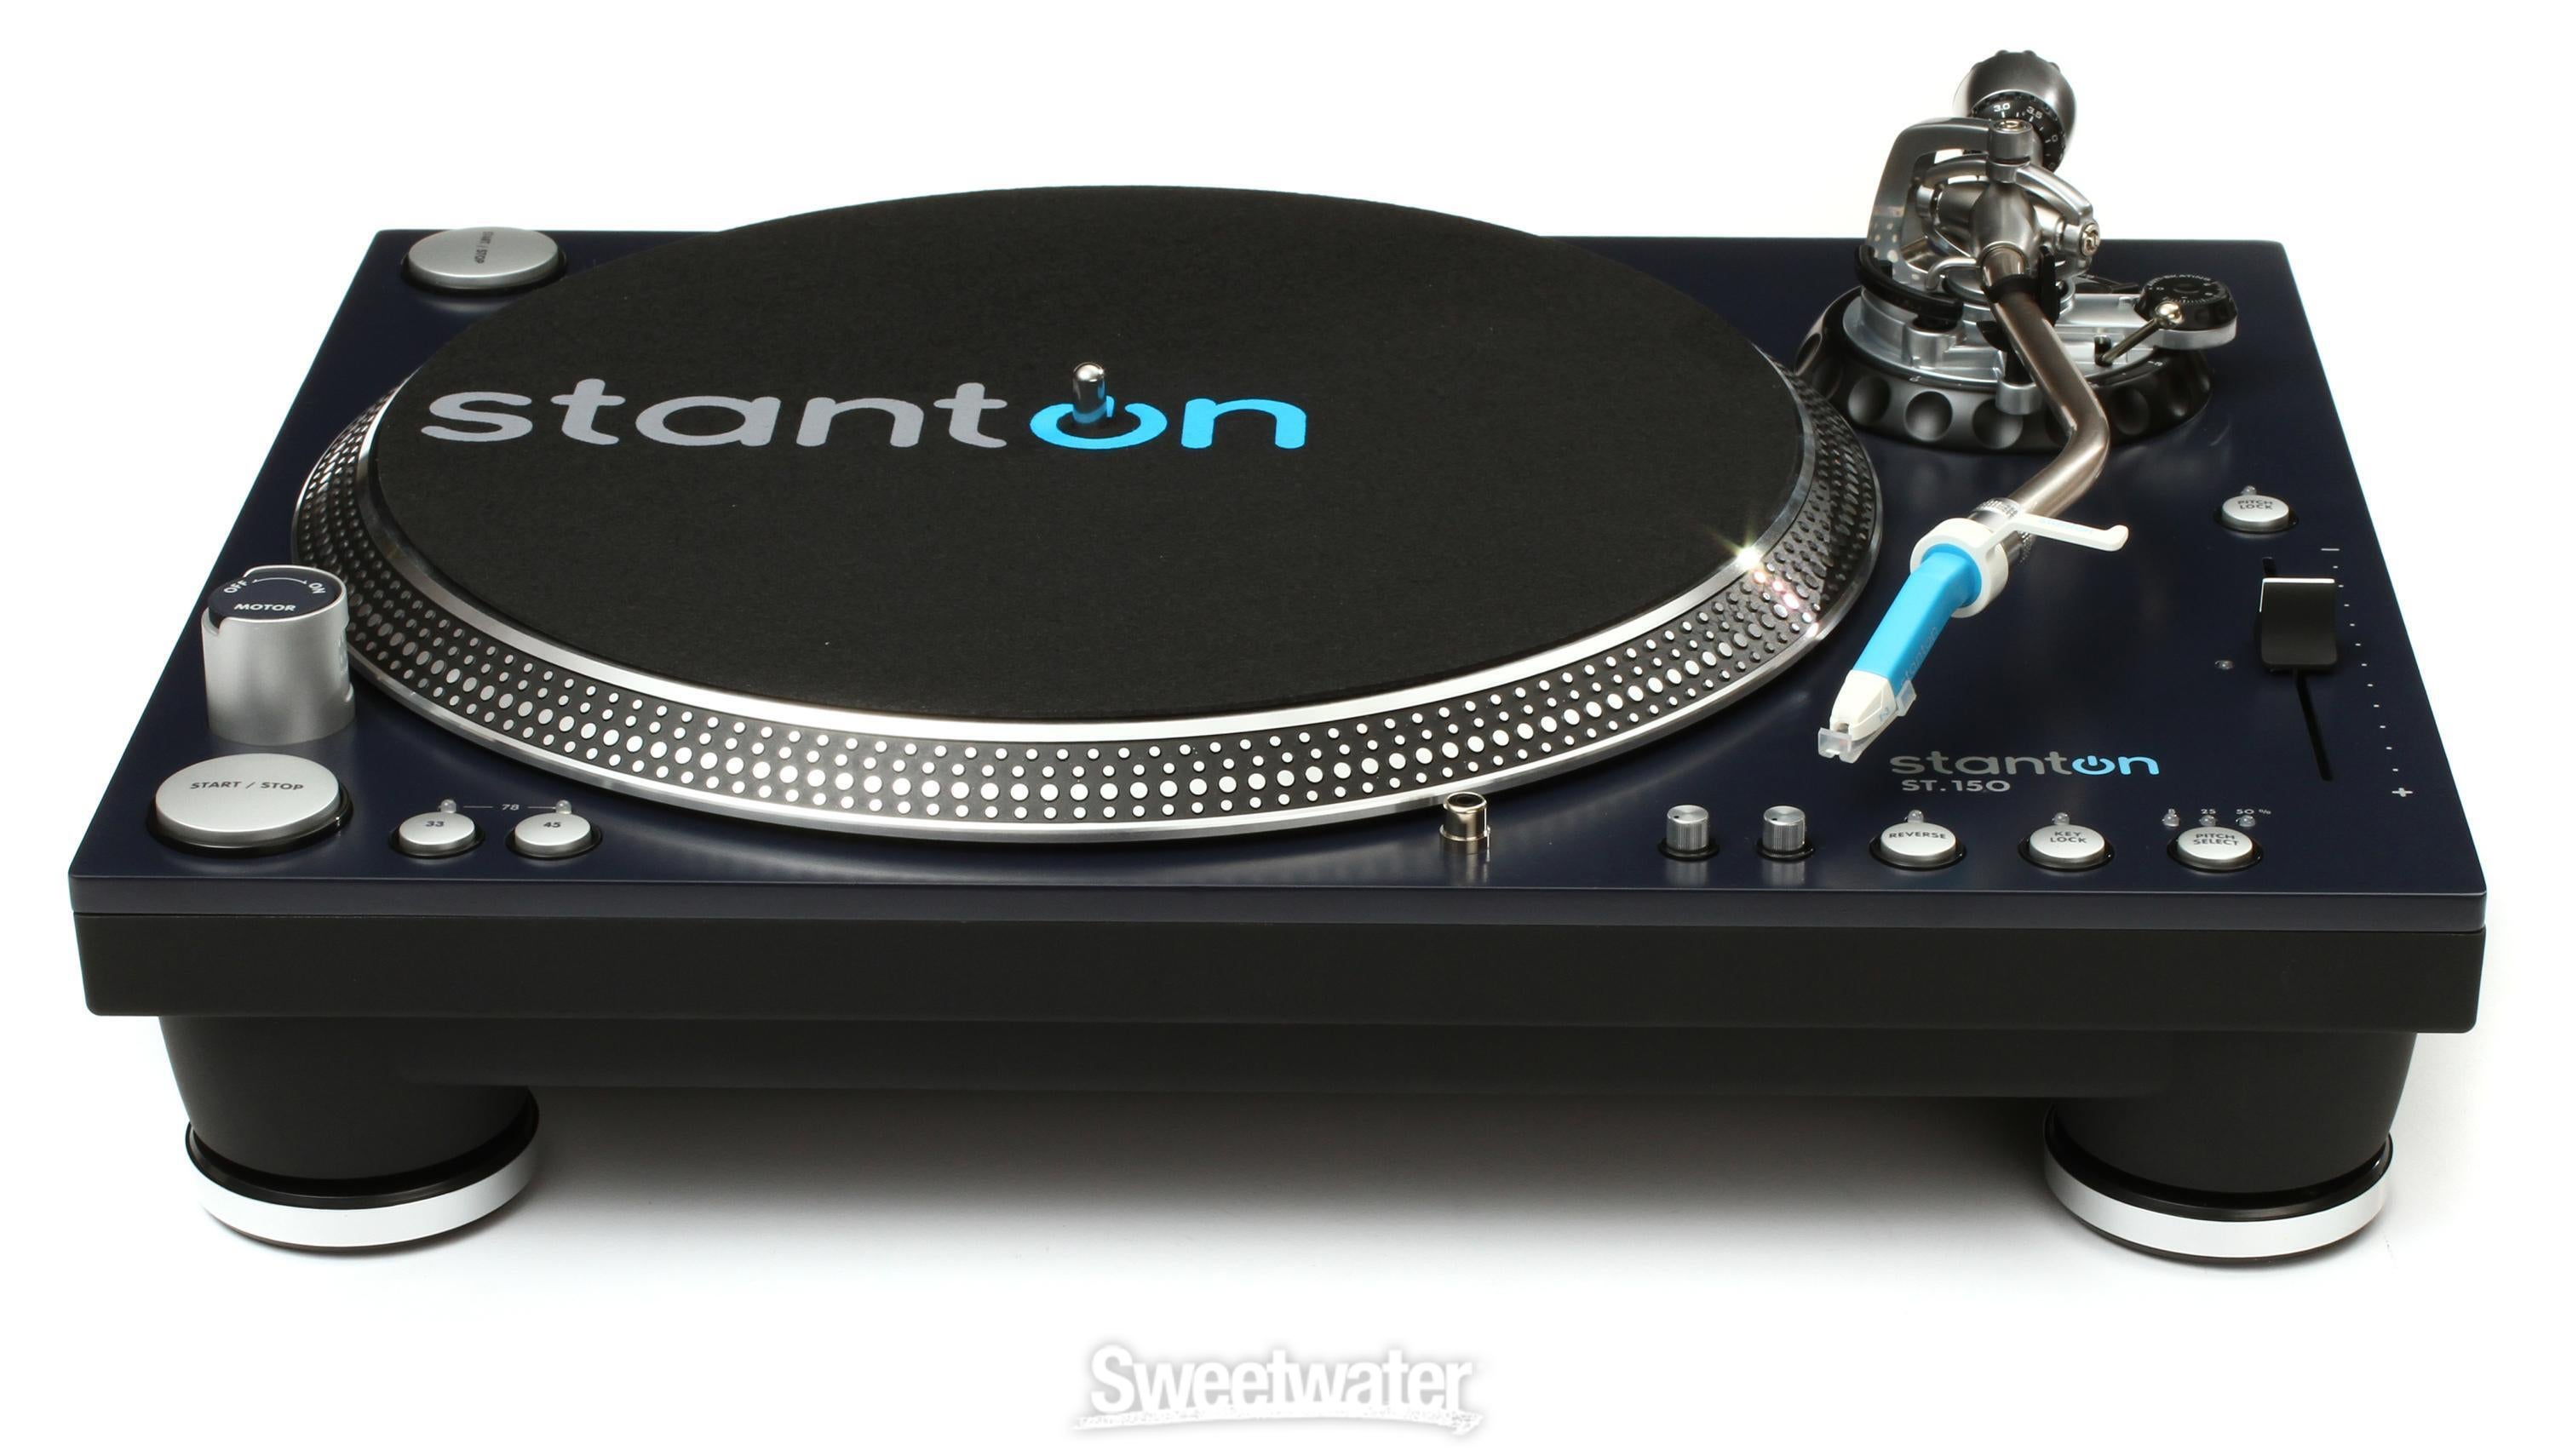 Stanton ST.150 Turntable | Sweetwater